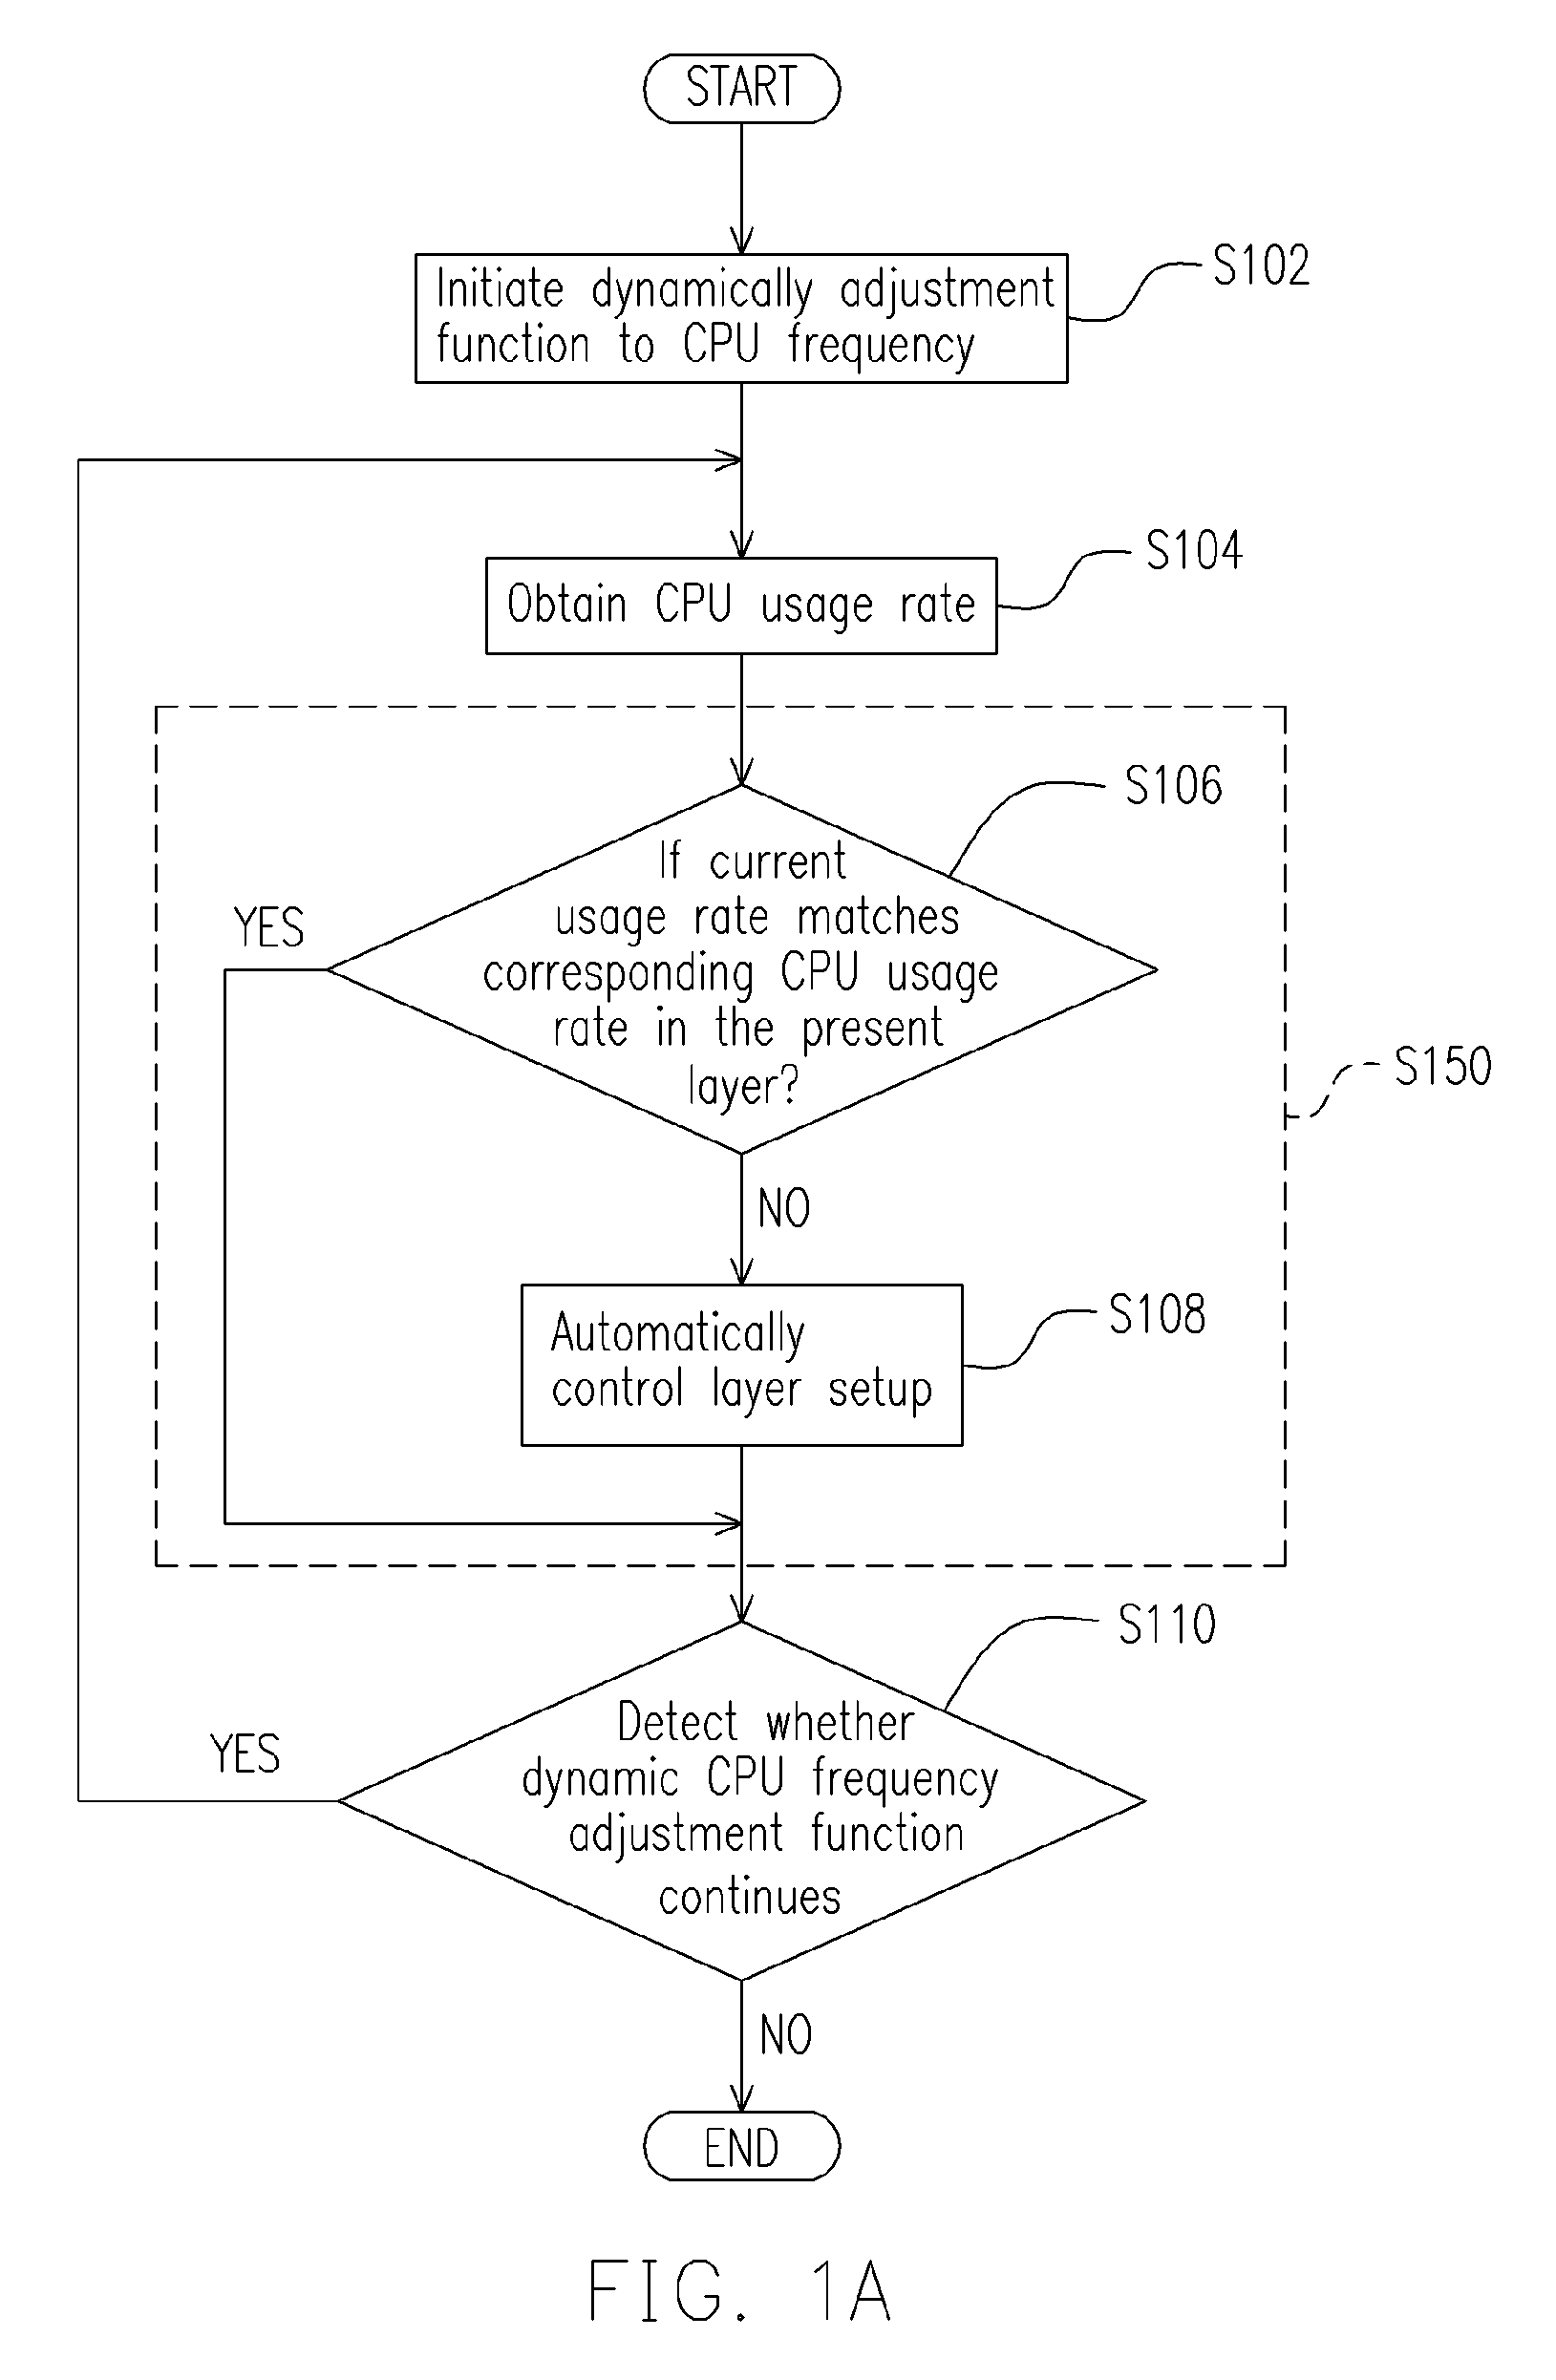 [method for dynamically adjusting CPU requency]